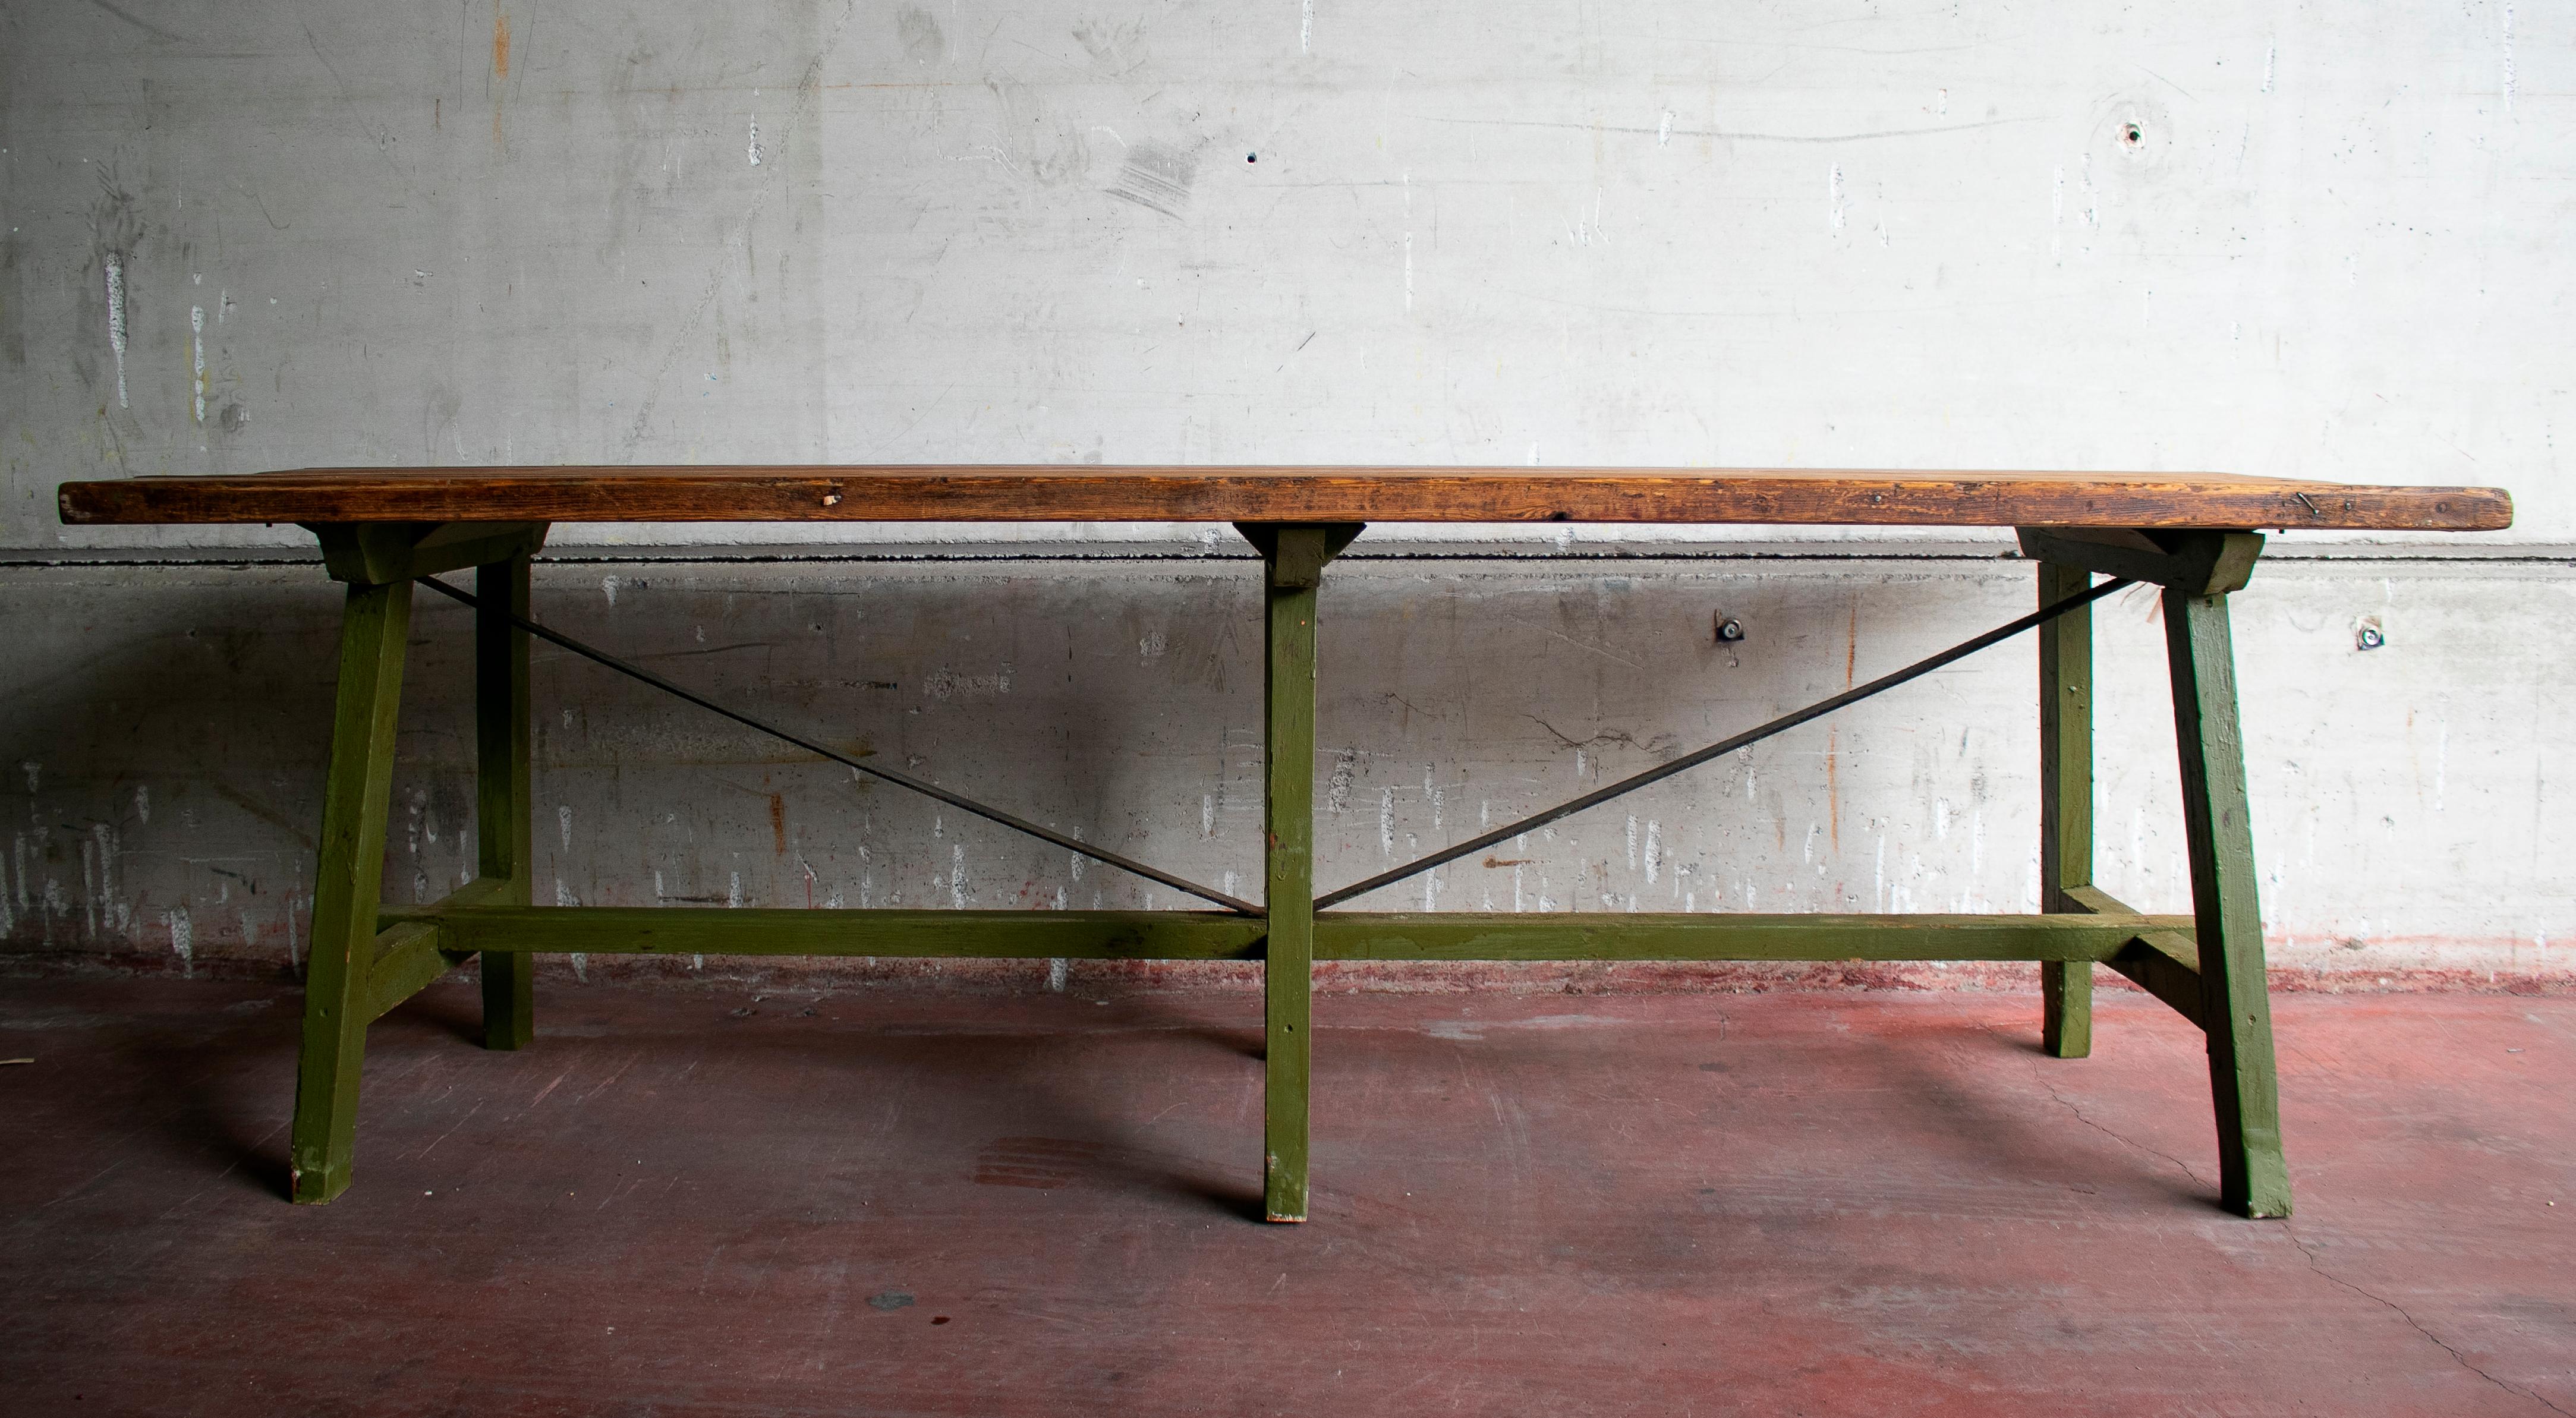 1930s Spanish wooden industrial table from an old bakery.